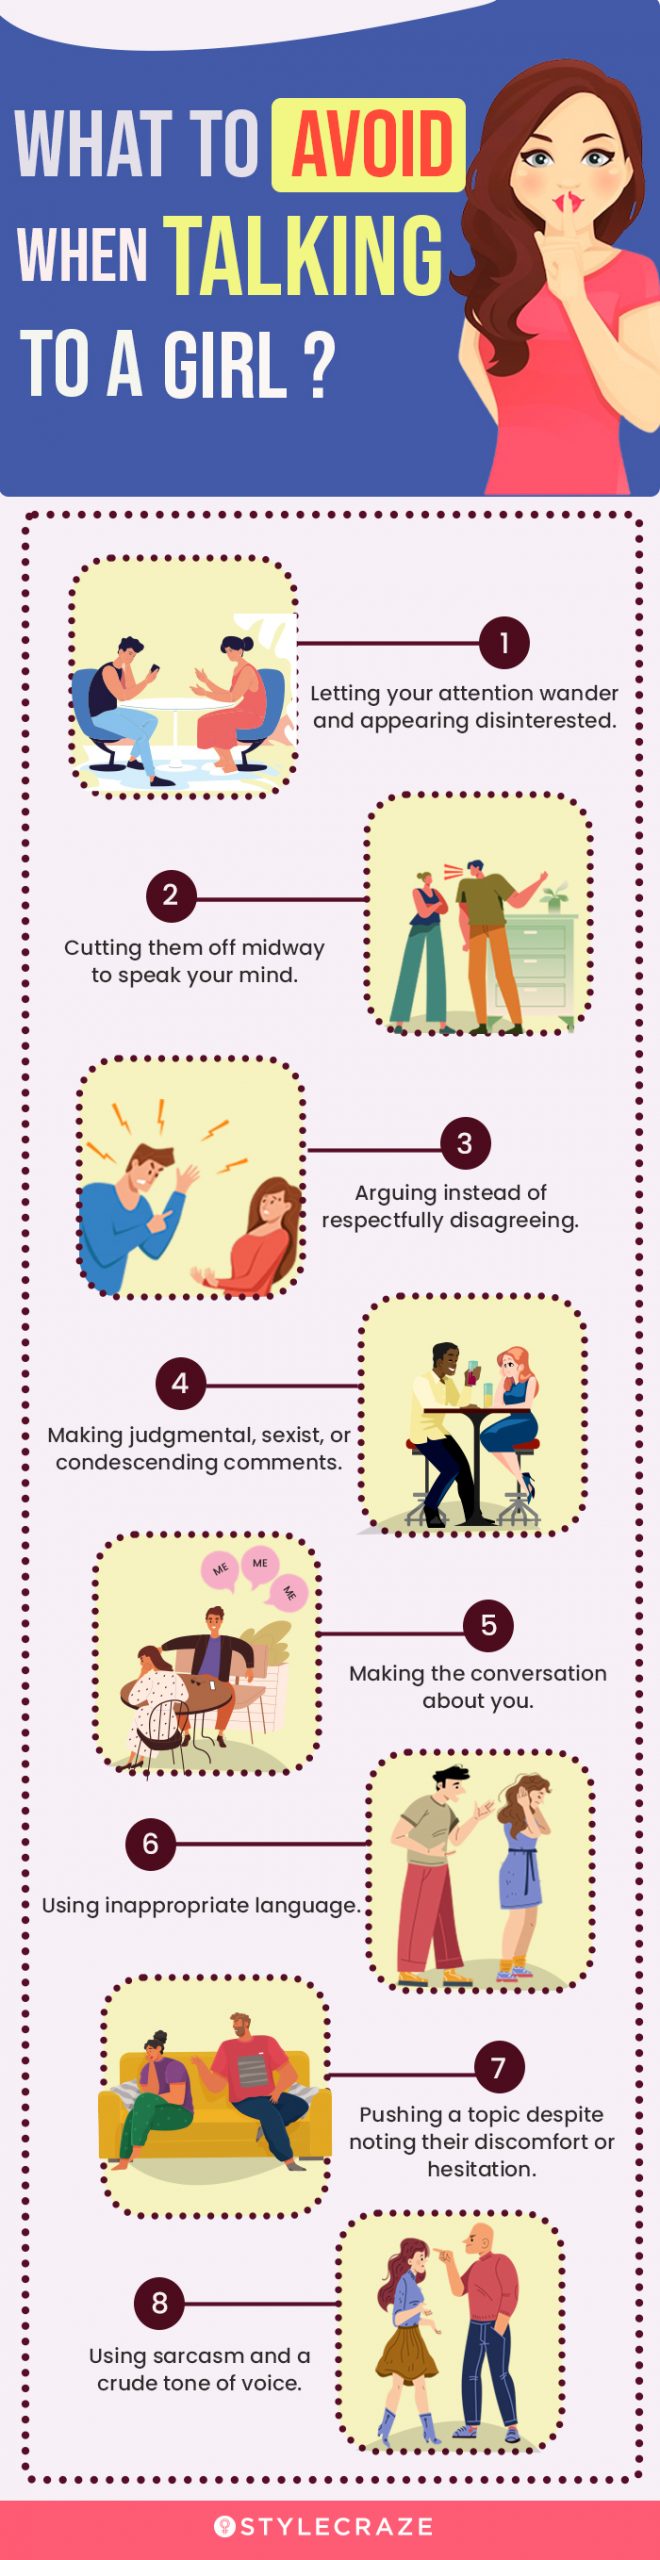 what to avoid when talking to a girl (infographic)